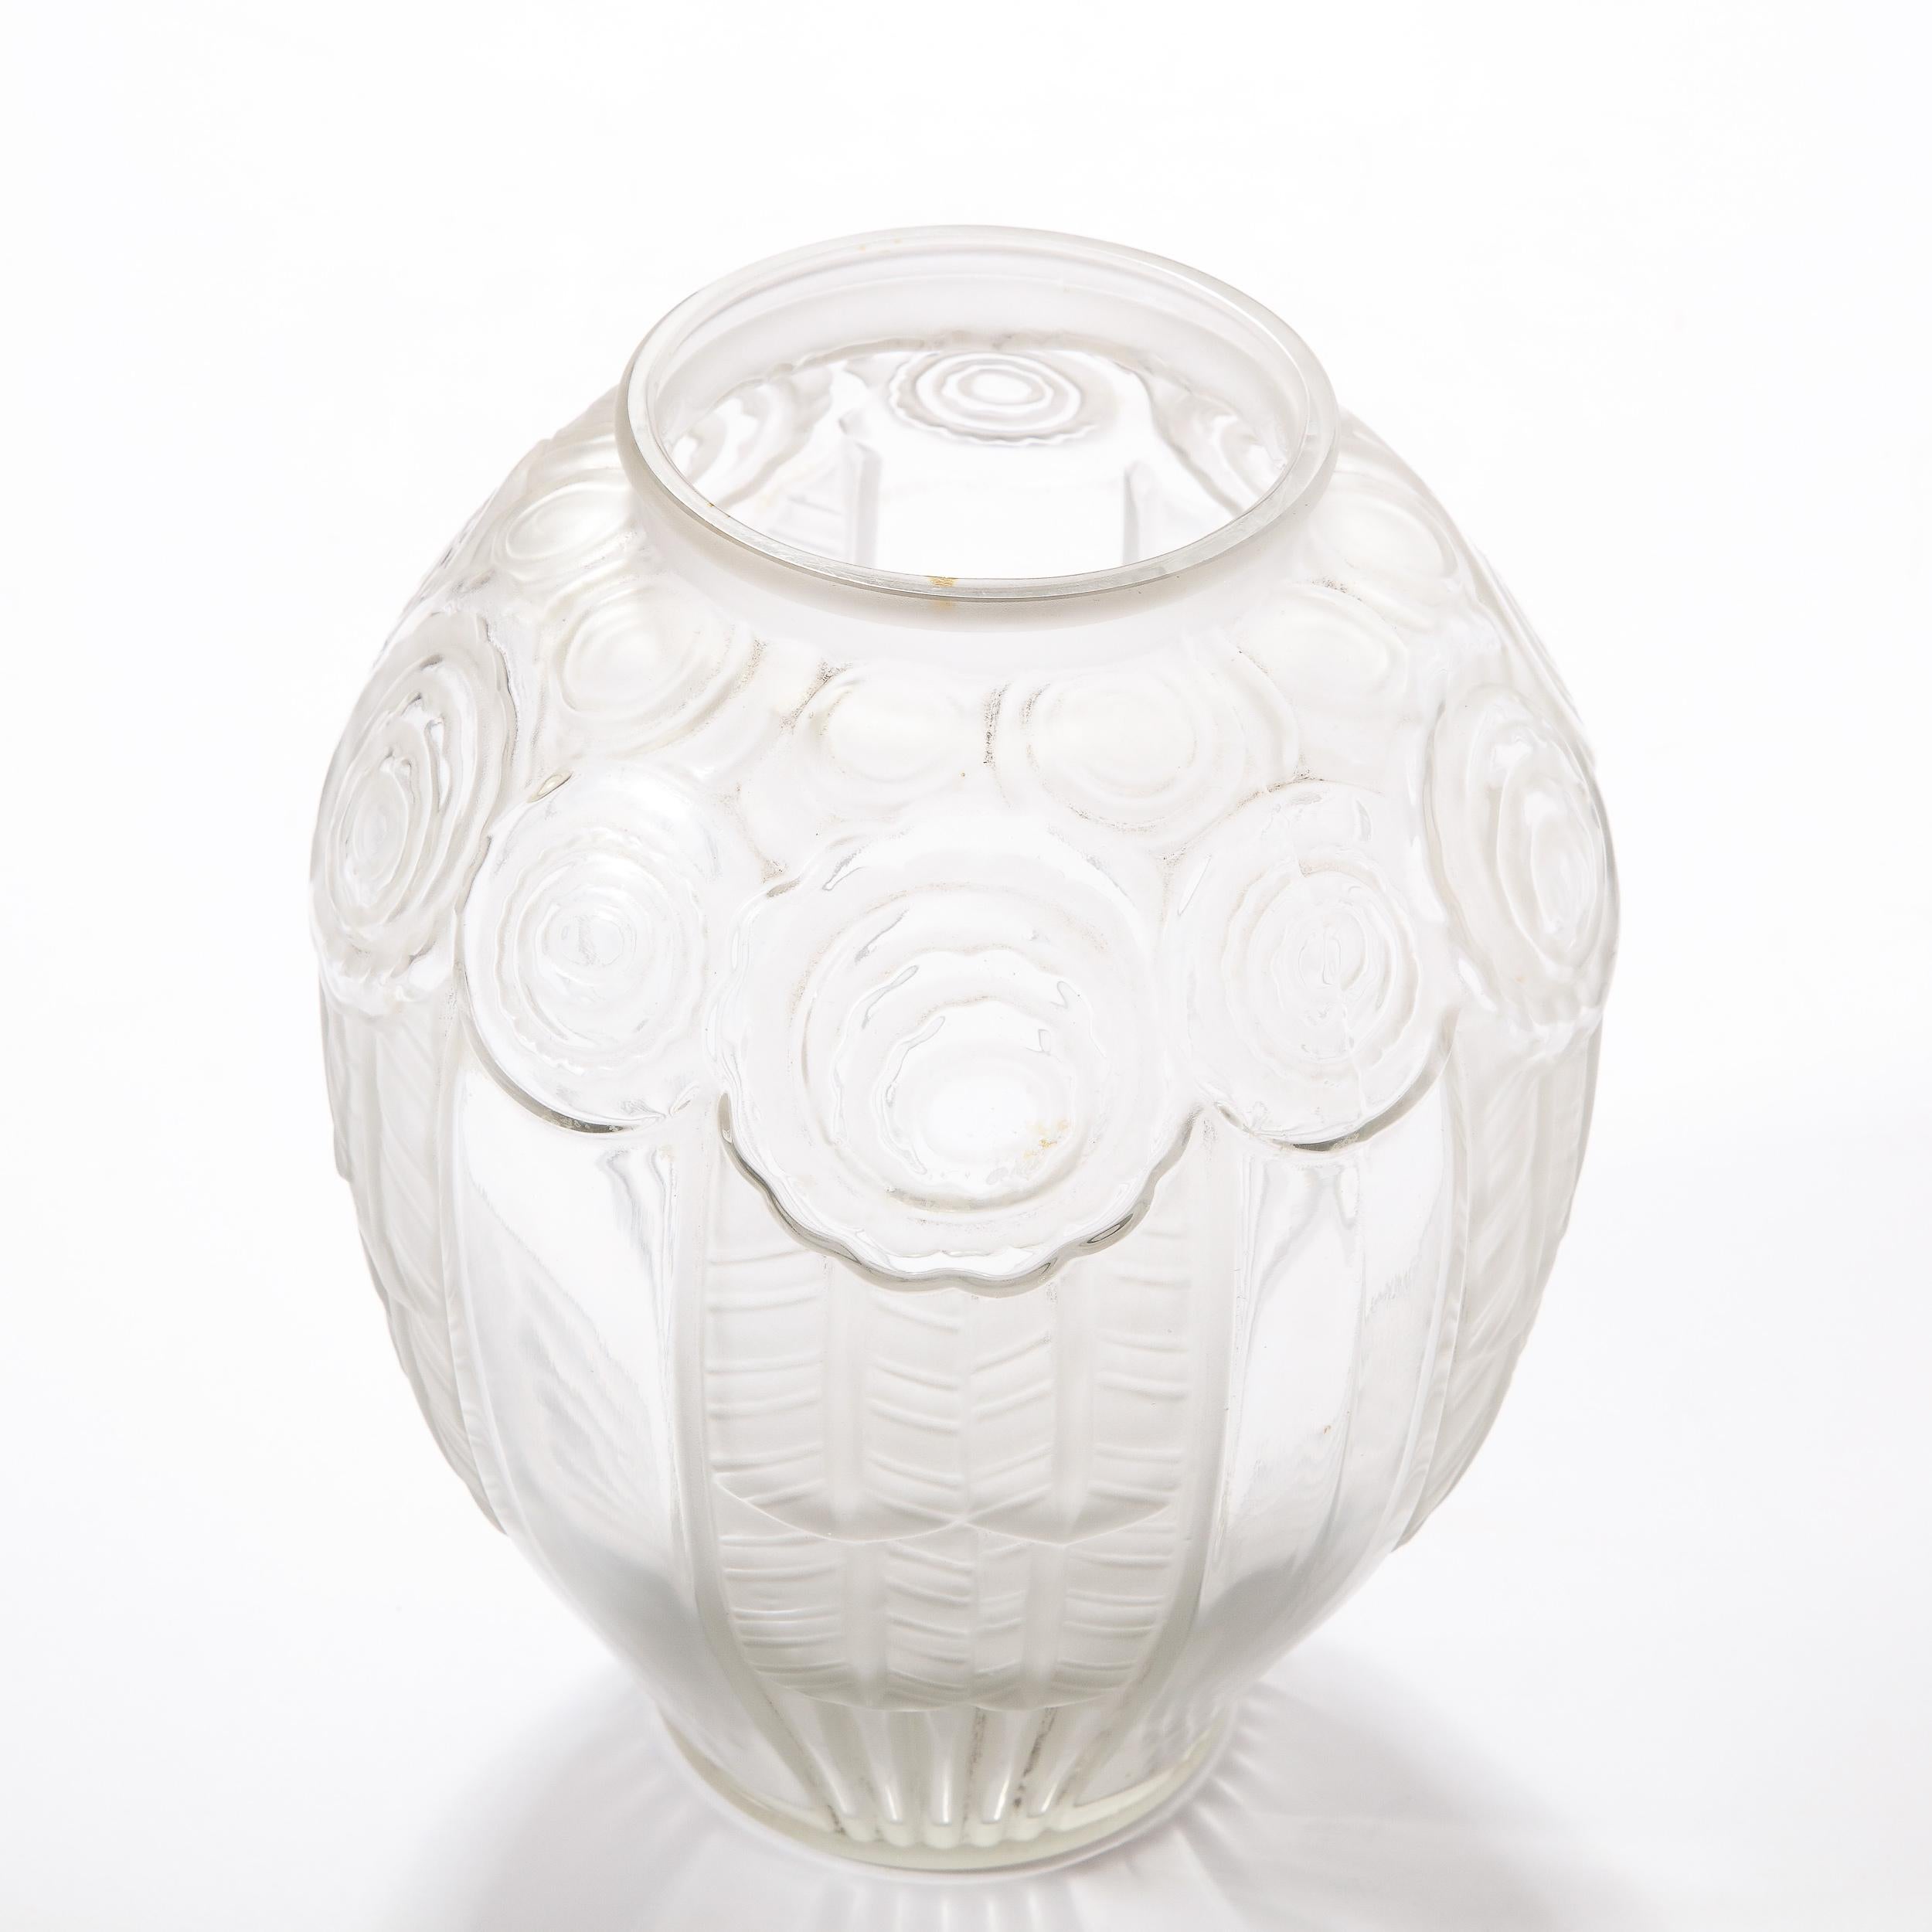 French Art Deco Cubist Translucent Glass Vase with Rose Detailing by Andre Hunebelle